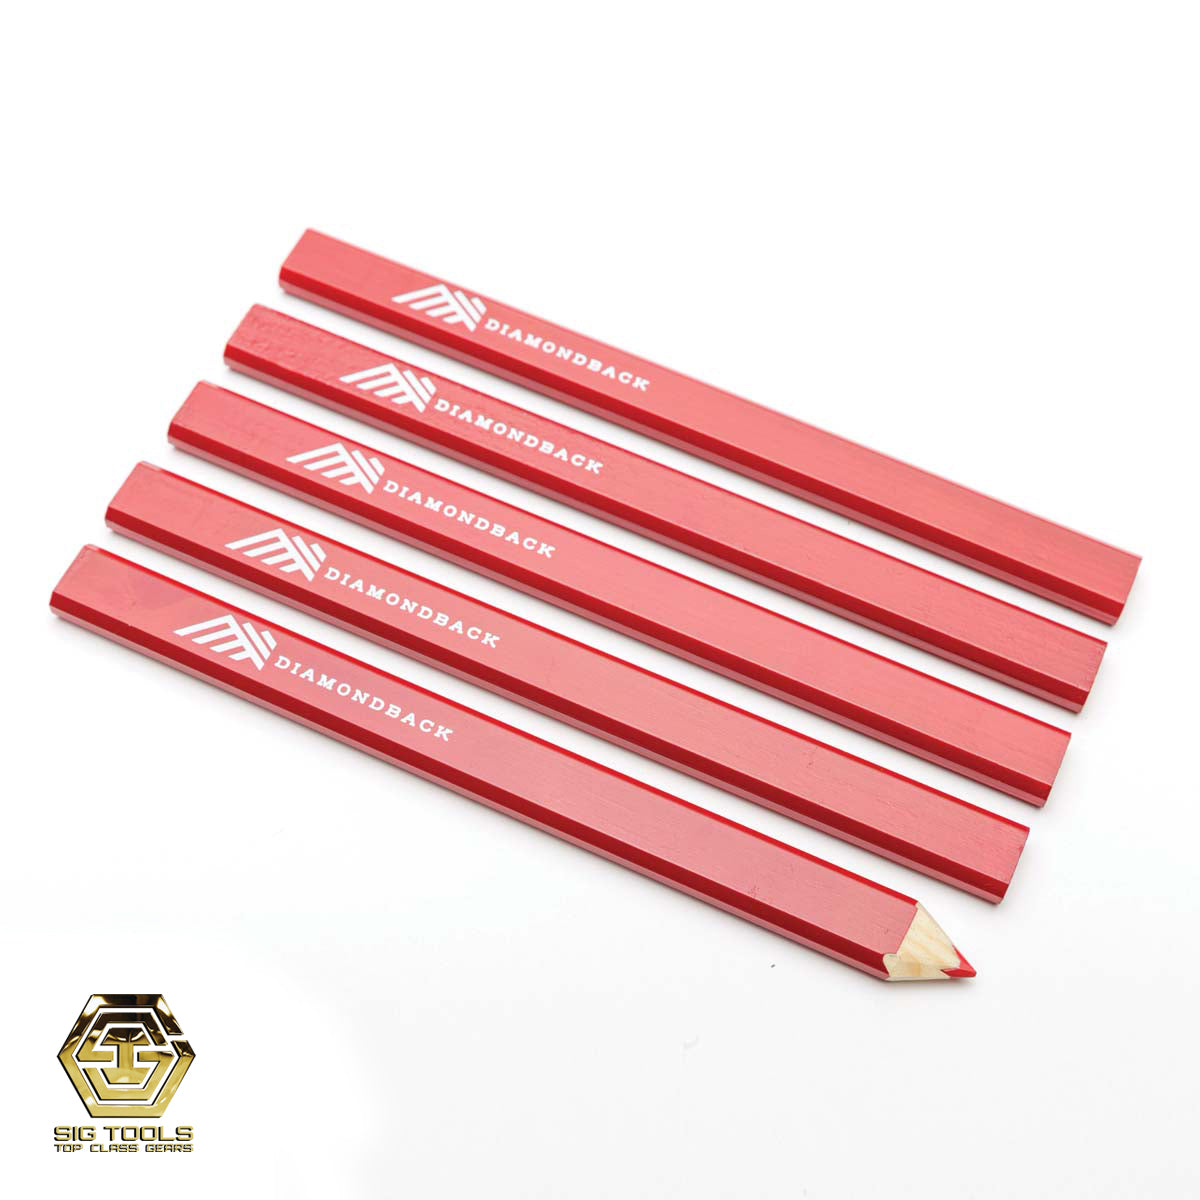 Red overlay, Red Graphite Carpenter Pencil Pack/ DB Carpenter Pencils Red Graphite-5 Pak /"Red overlay,Red Graphite Carpenter Pencils - Pack of 5 by Diamondback"  